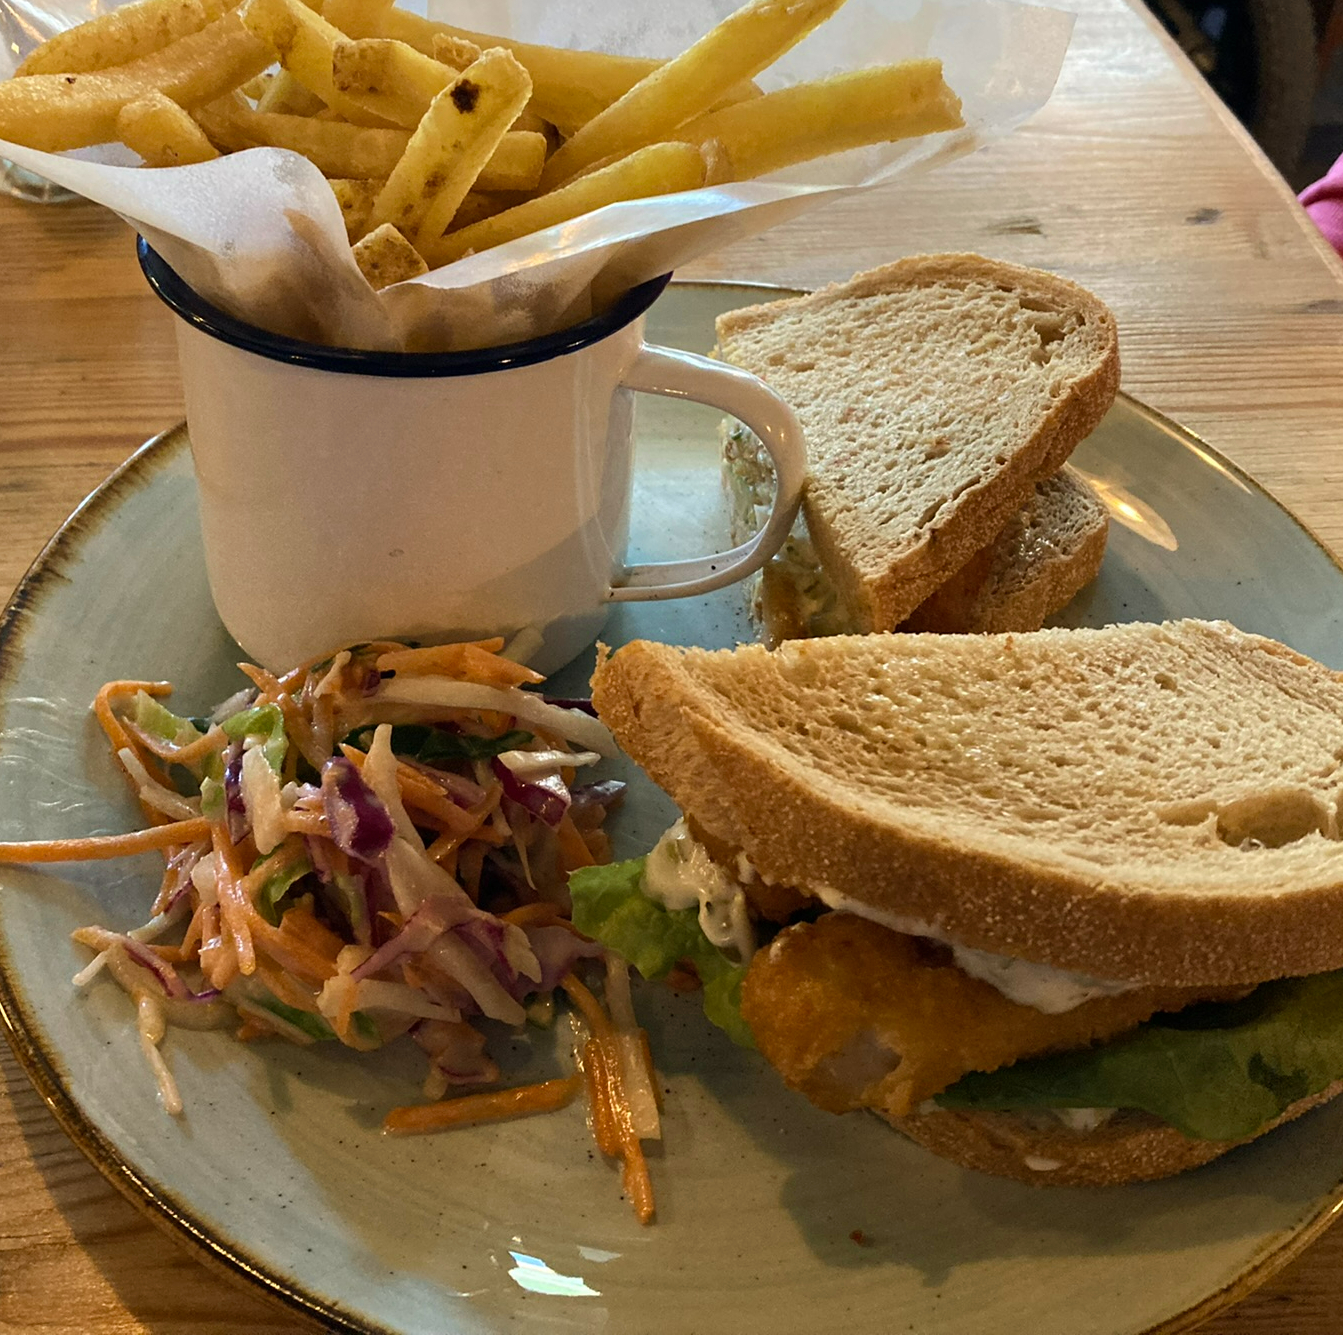 The fish finger sandwich, in which the fish fingers drowned into much tartare sauce